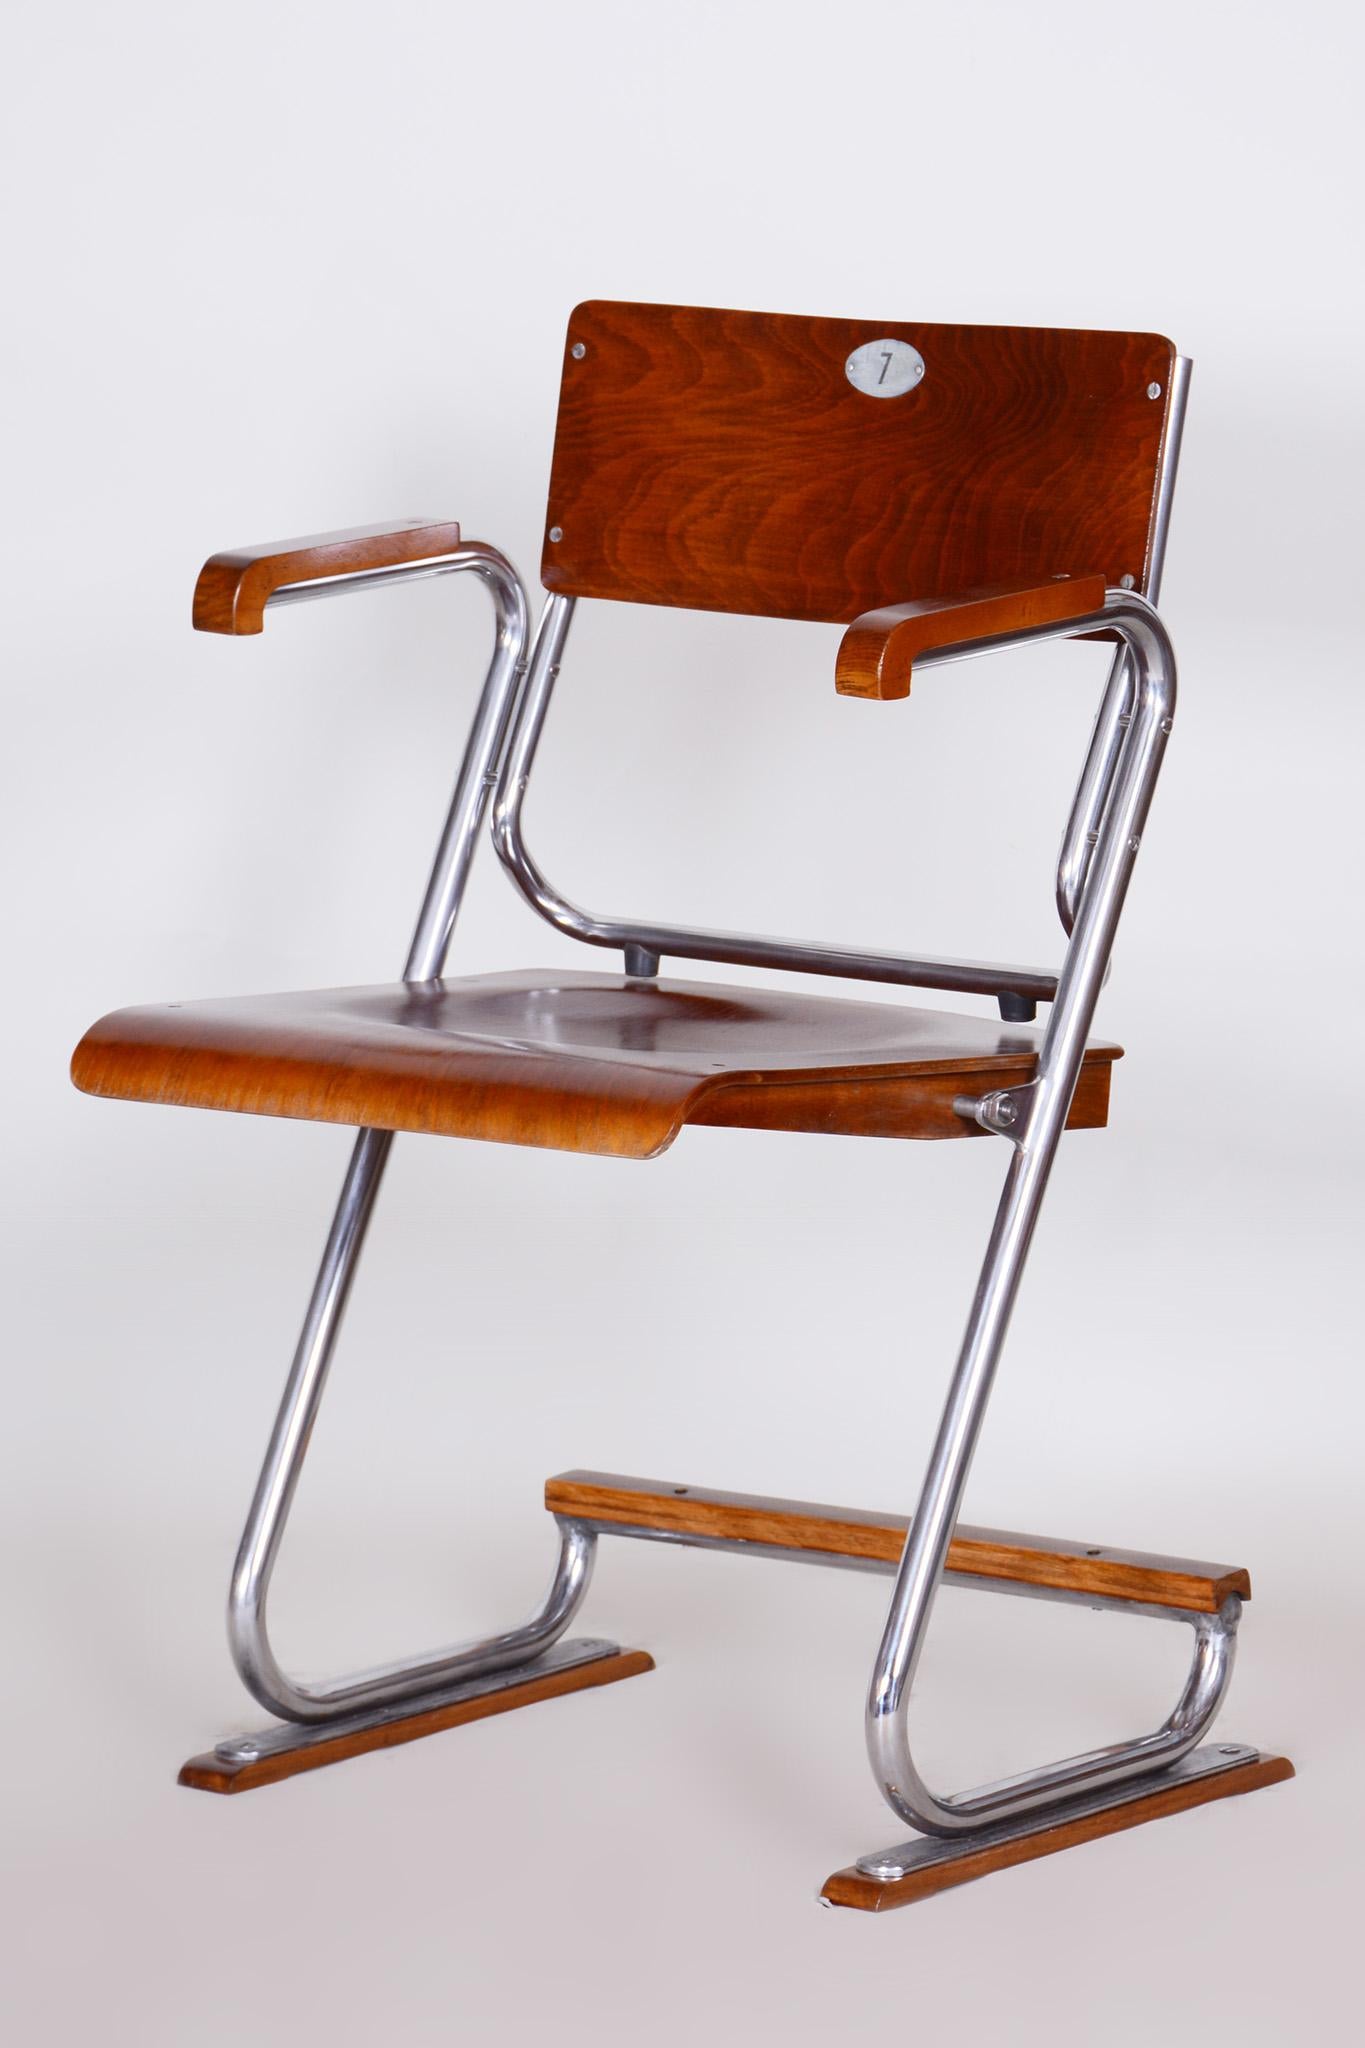 Restored Bauhaus Folding Chair, Beech Plywood, Revived Polish, Czechia, 1930s For Sale 2